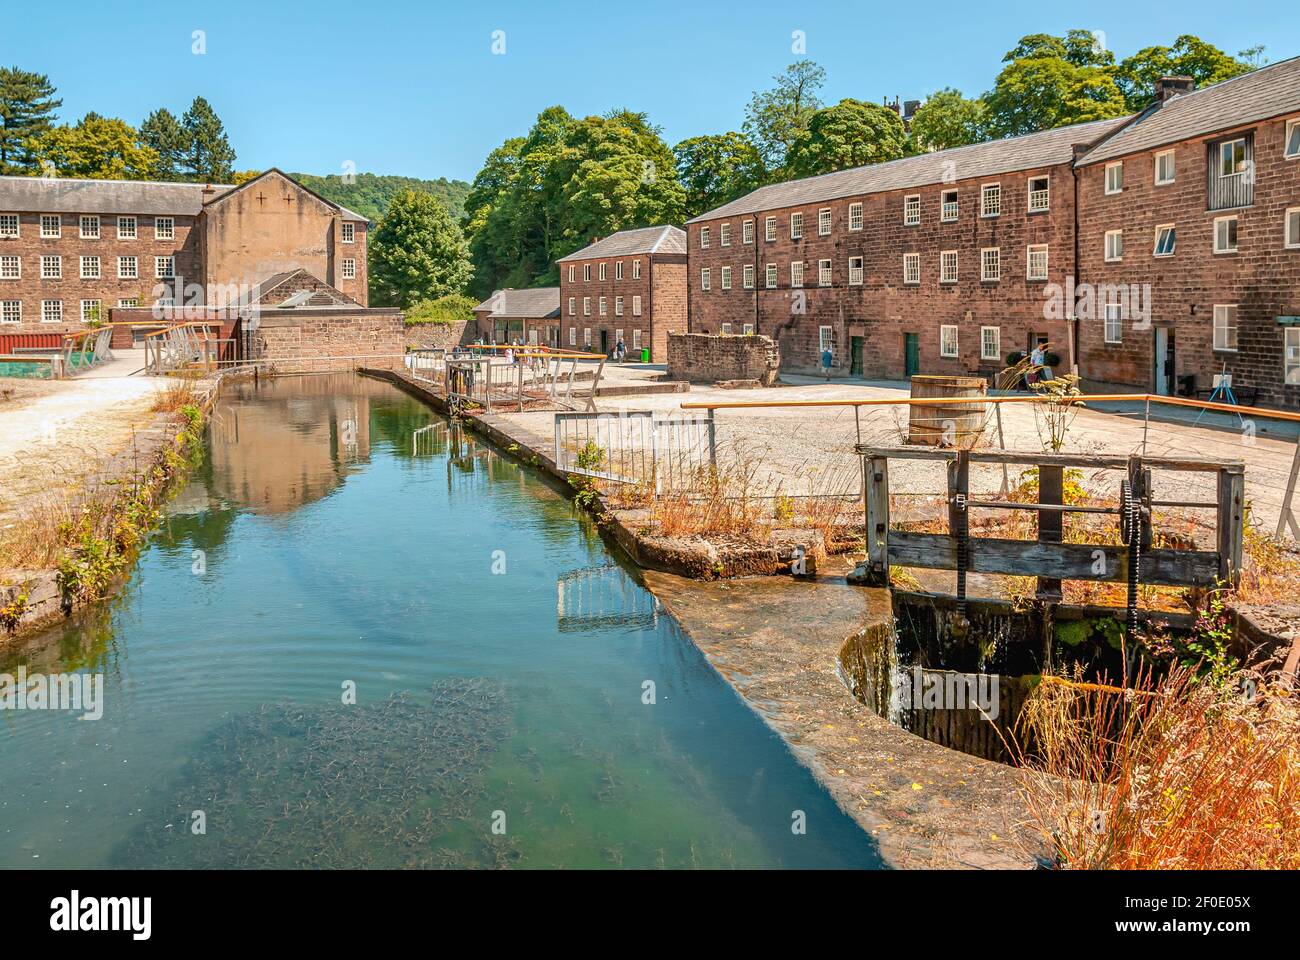 Cromford Mill water-powered cotton spinning mill in Cromford, Derbyshire, England Stock Photo